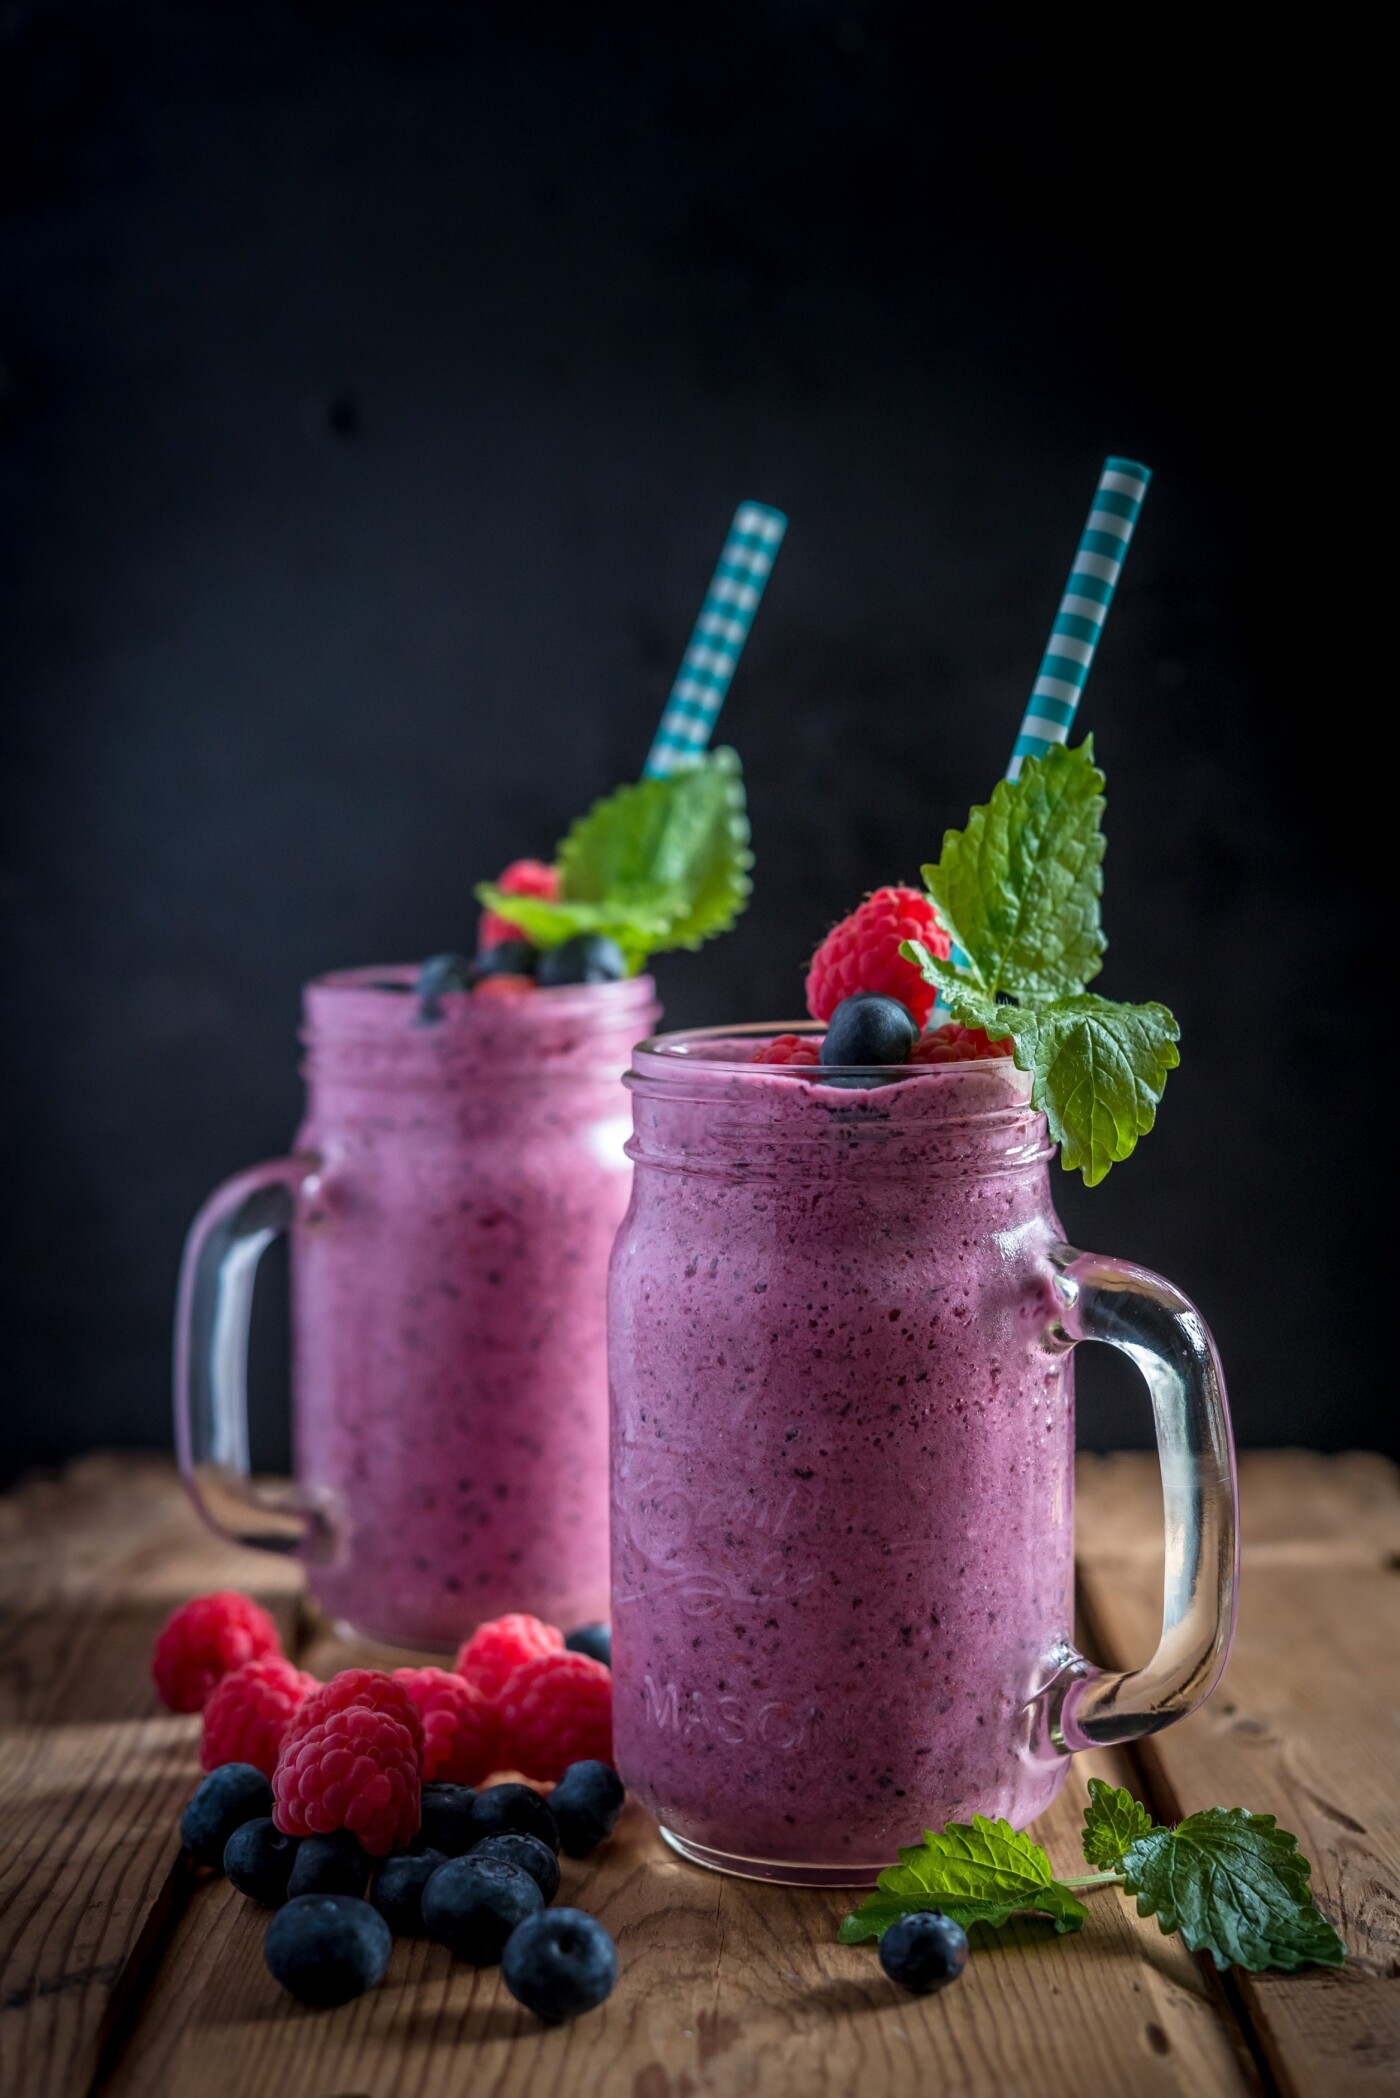 The summer berries make for an amazing smoothie, which works perfectly as a breakfast. Finish it with blueberries, raspberries and lemon balm leaves.